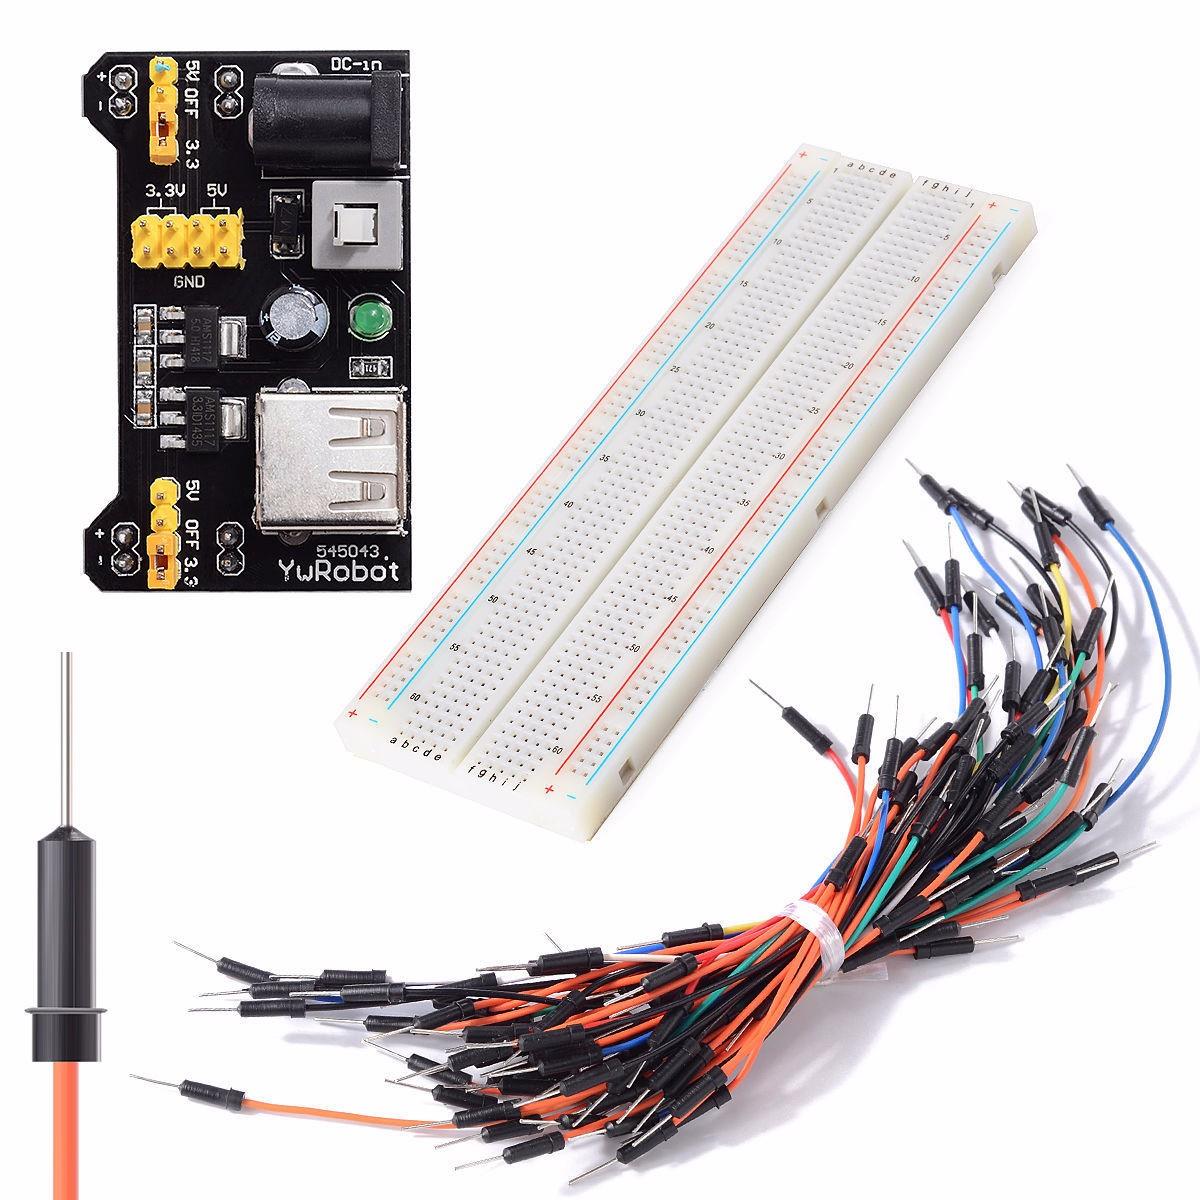 MB-102 830 point breadboard power supply model with jump wires kit